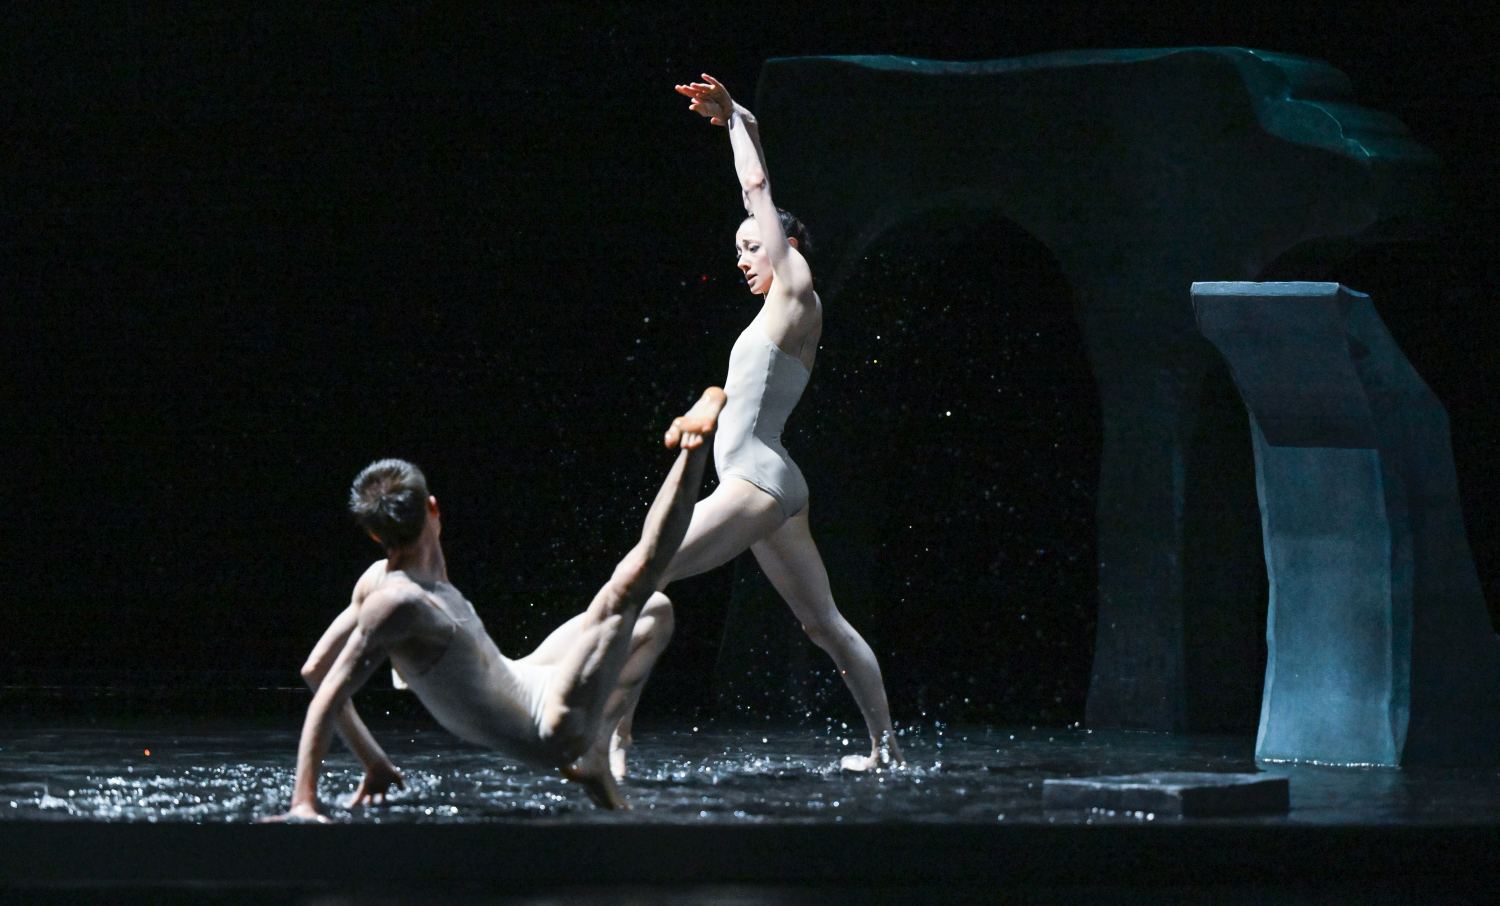 9. S.Heller and A.Zuccarini, “Ifima” by L.Stiens and S.Heller, Stuttgart Ballet 2022 © Stuttgart Ballet